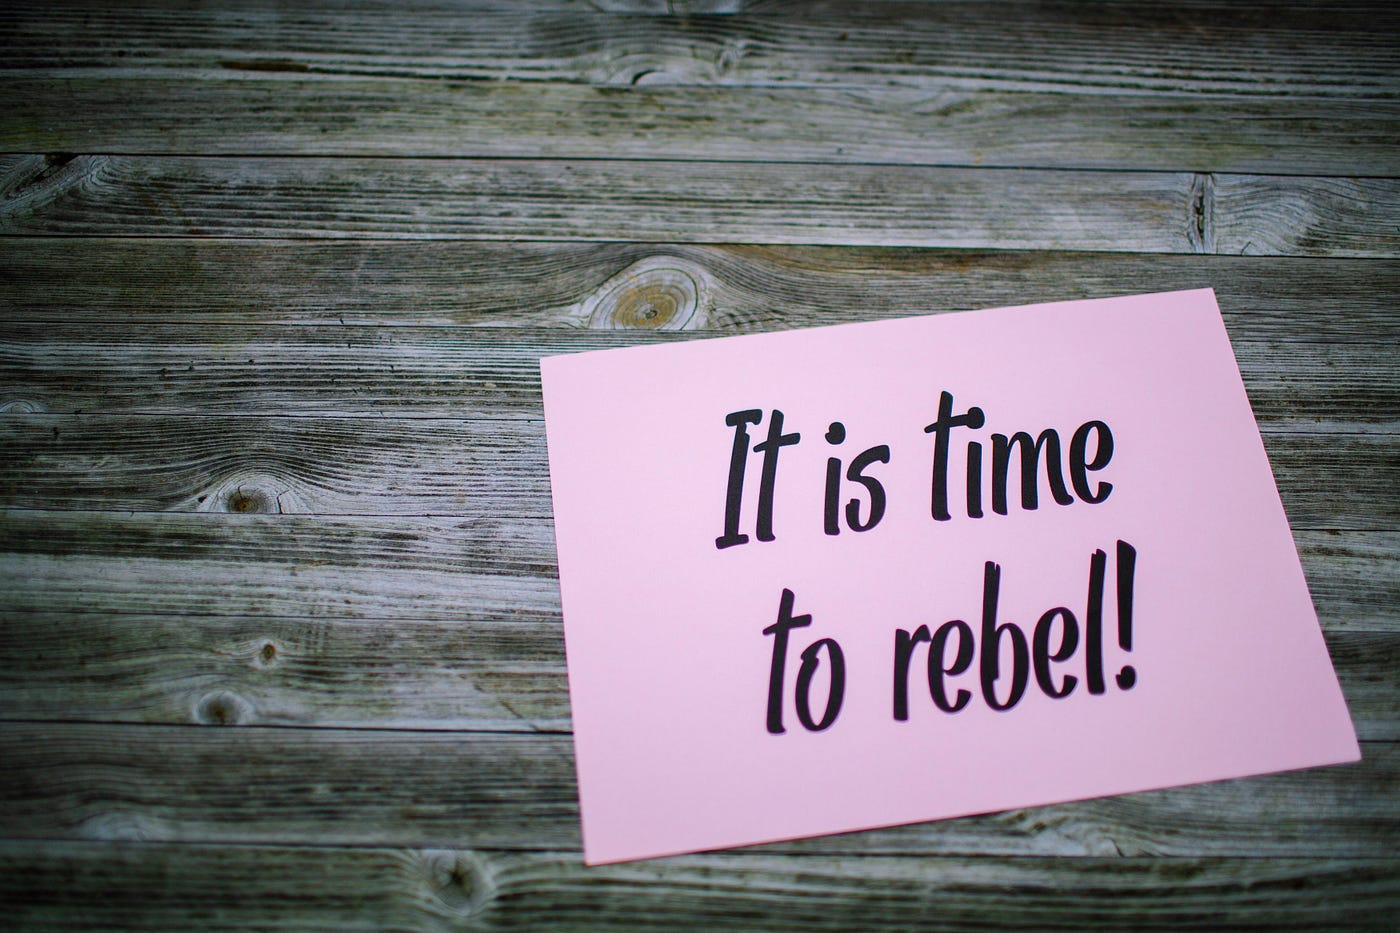 It’s Time to Rebel on a note.